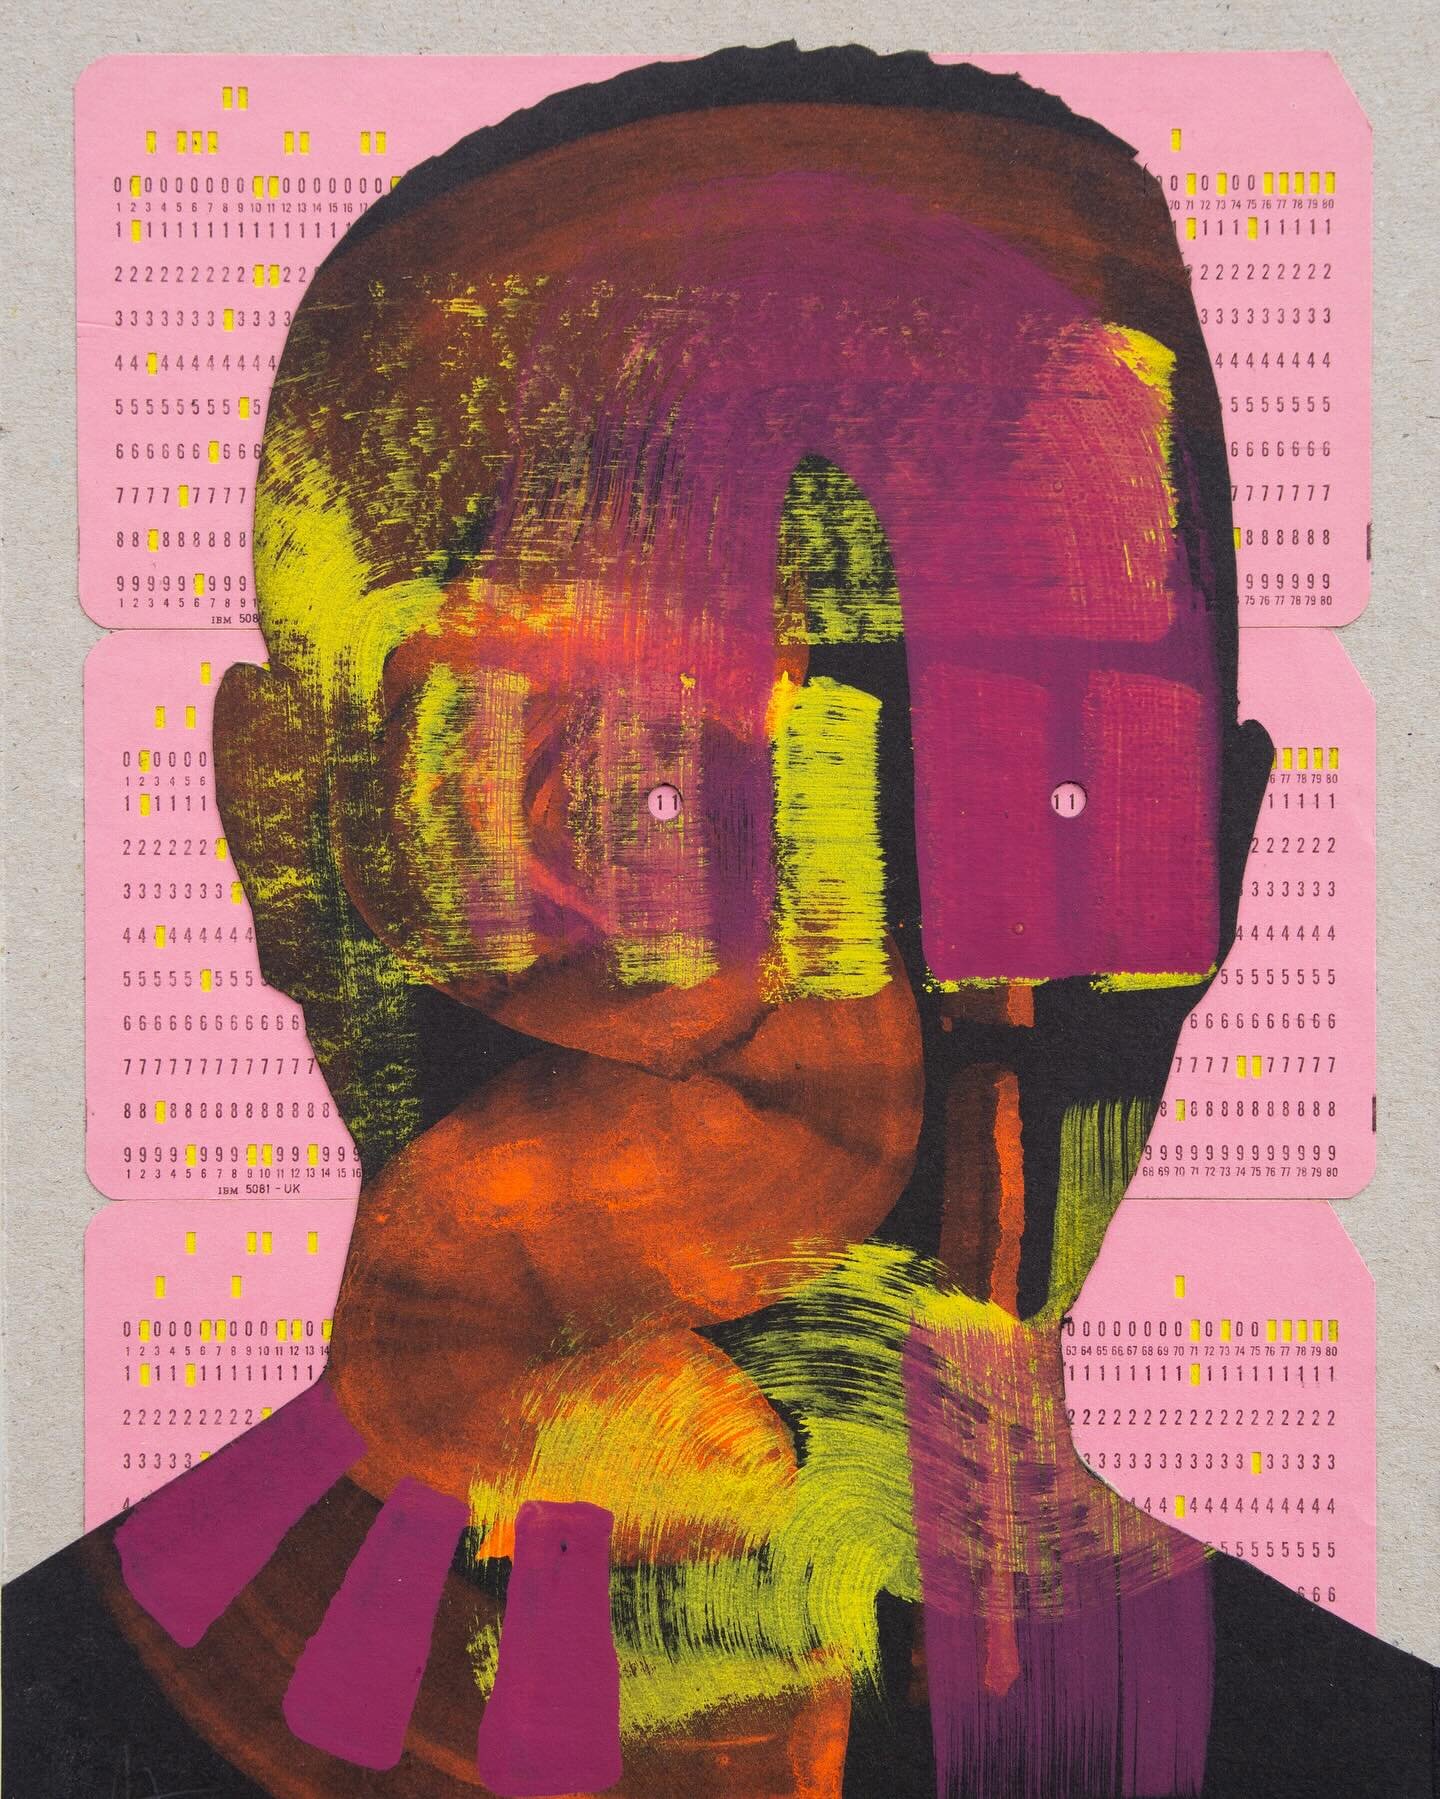 &lsquo;Amused&rsquo;
2023. Gouache on used computer punchcards 
#art #collage #portraitpainting #nickgentry #nickgentryart